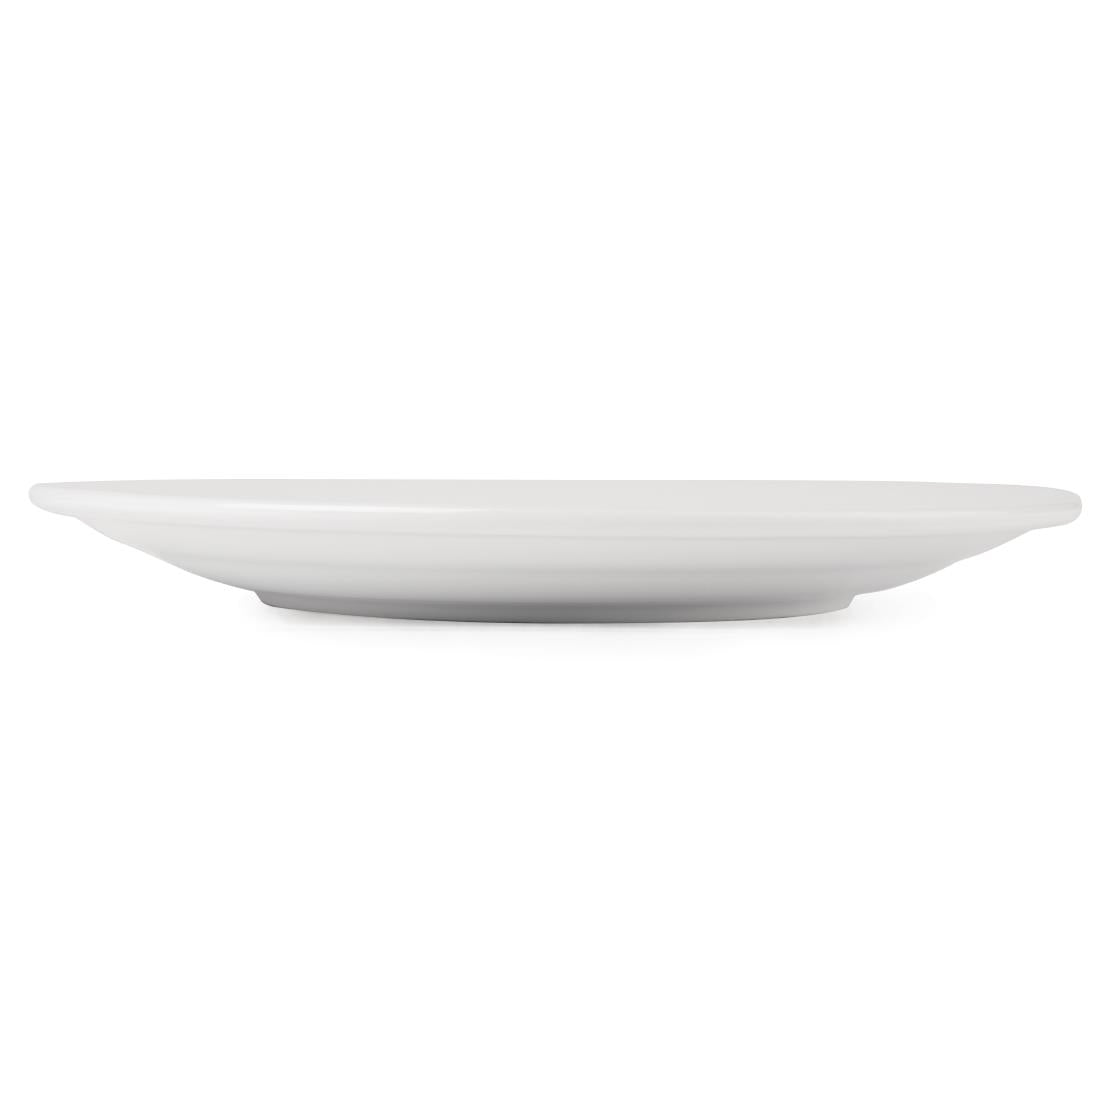 Athena Hotelware Wide Rimmed Plates 280mm (Pack of 6) JD Catering Equipment Solutions Ltd